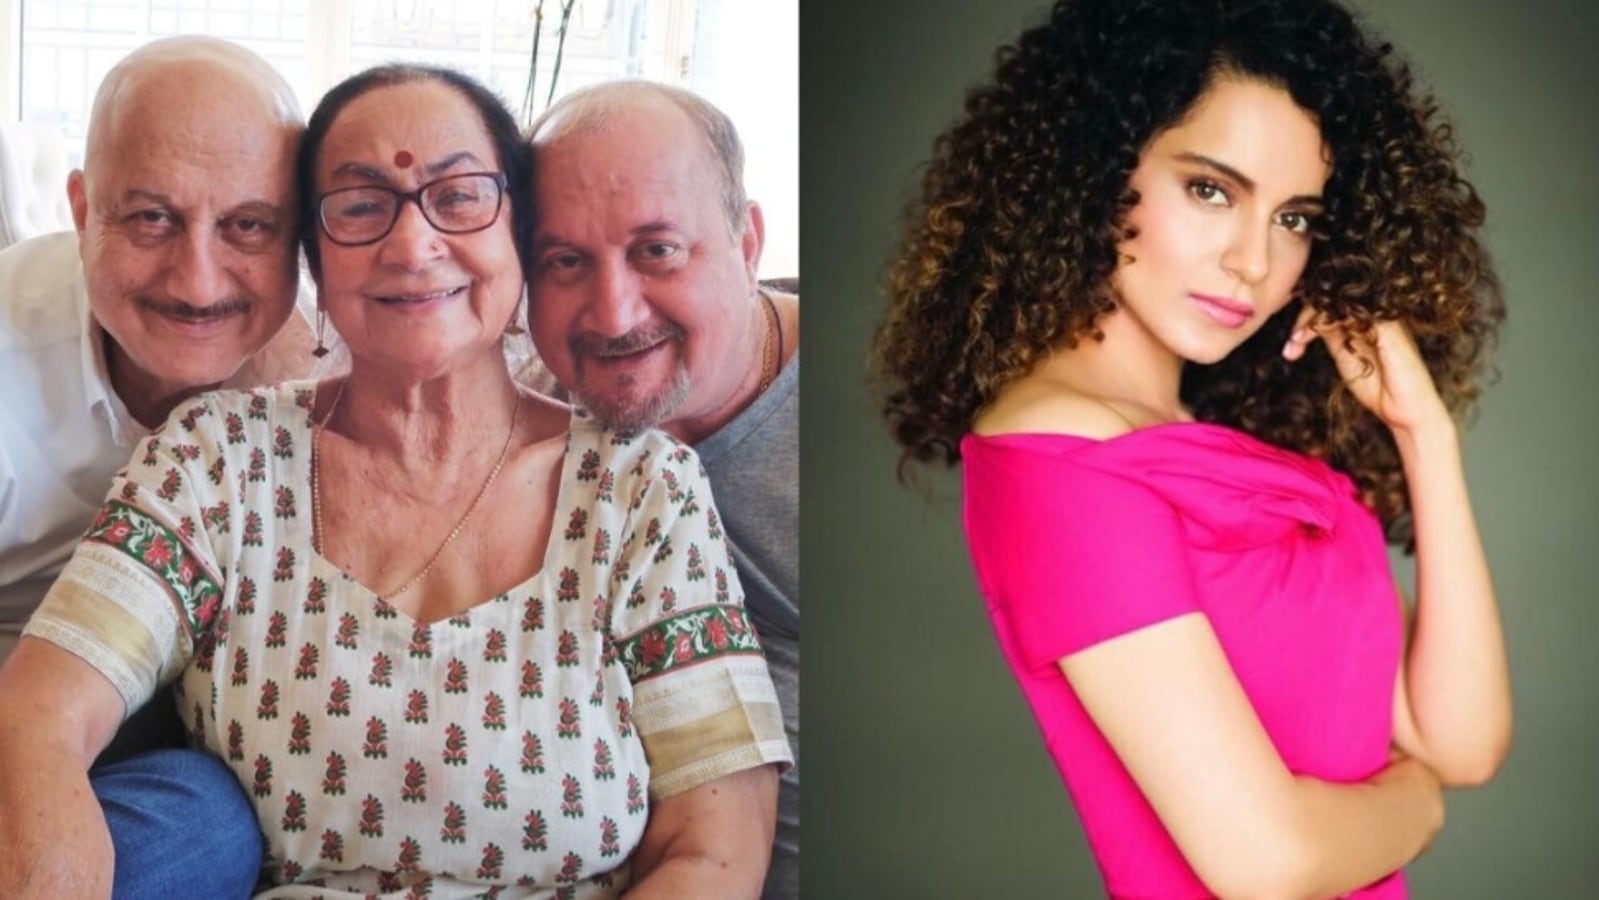 Anupam Kher’s mother says she likes PM Modi more than her sons, wants to meet him; Kangana Ranaut reacts. Watch